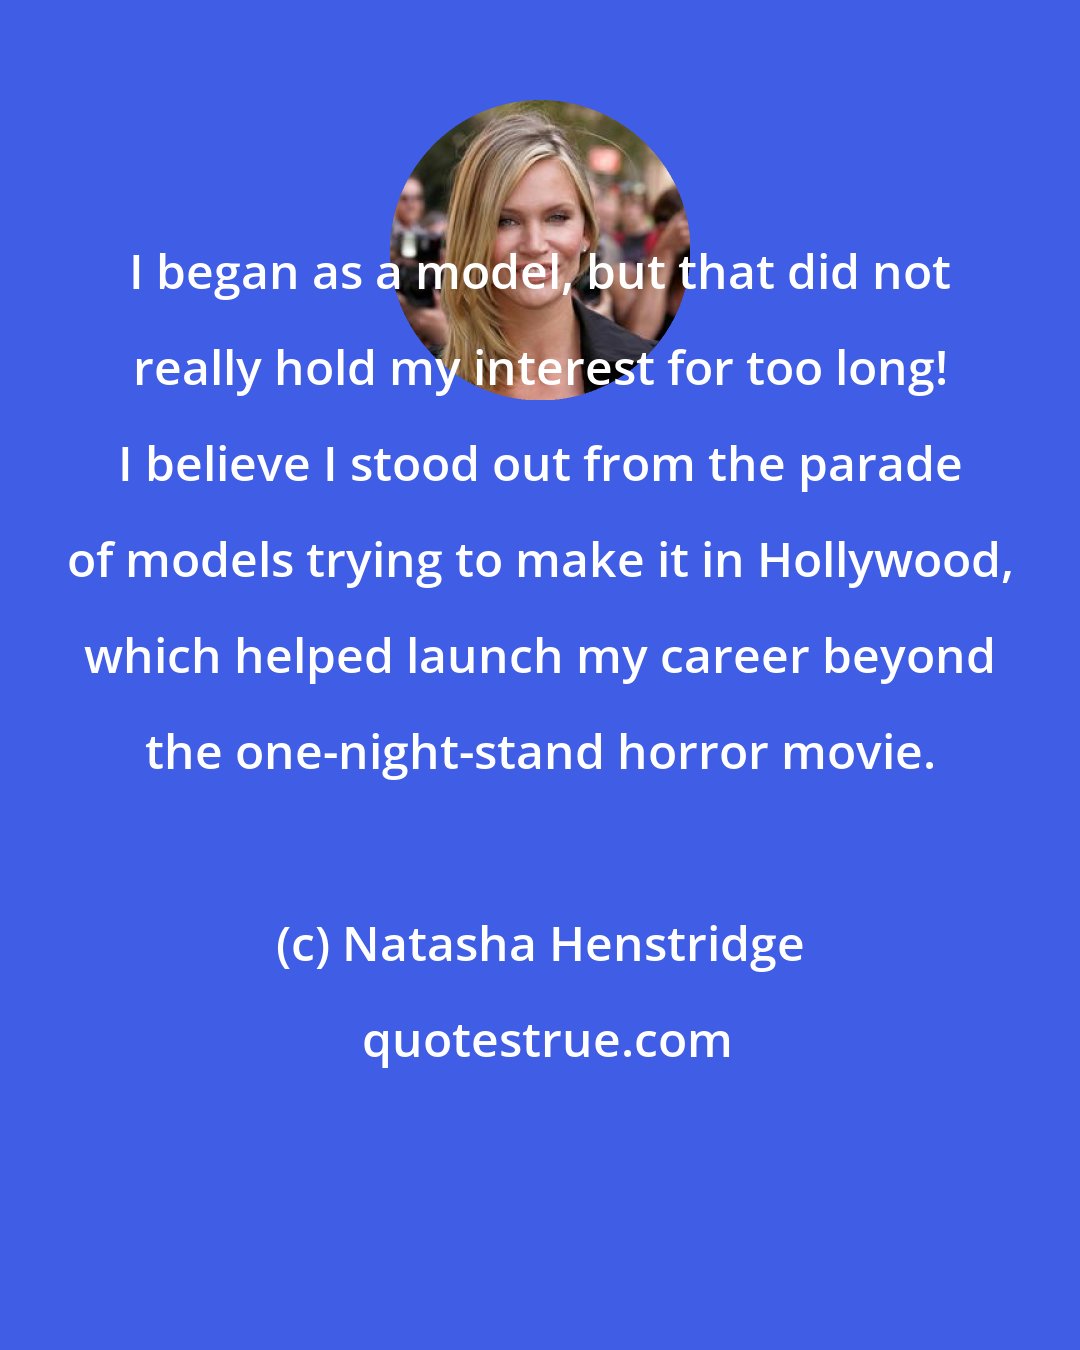 Natasha Henstridge: I began as a model, but that did not really hold my interest for too long! I believe I stood out from the parade of models trying to make it in Hollywood, which helped launch my career beyond the one-night-stand horror movie.